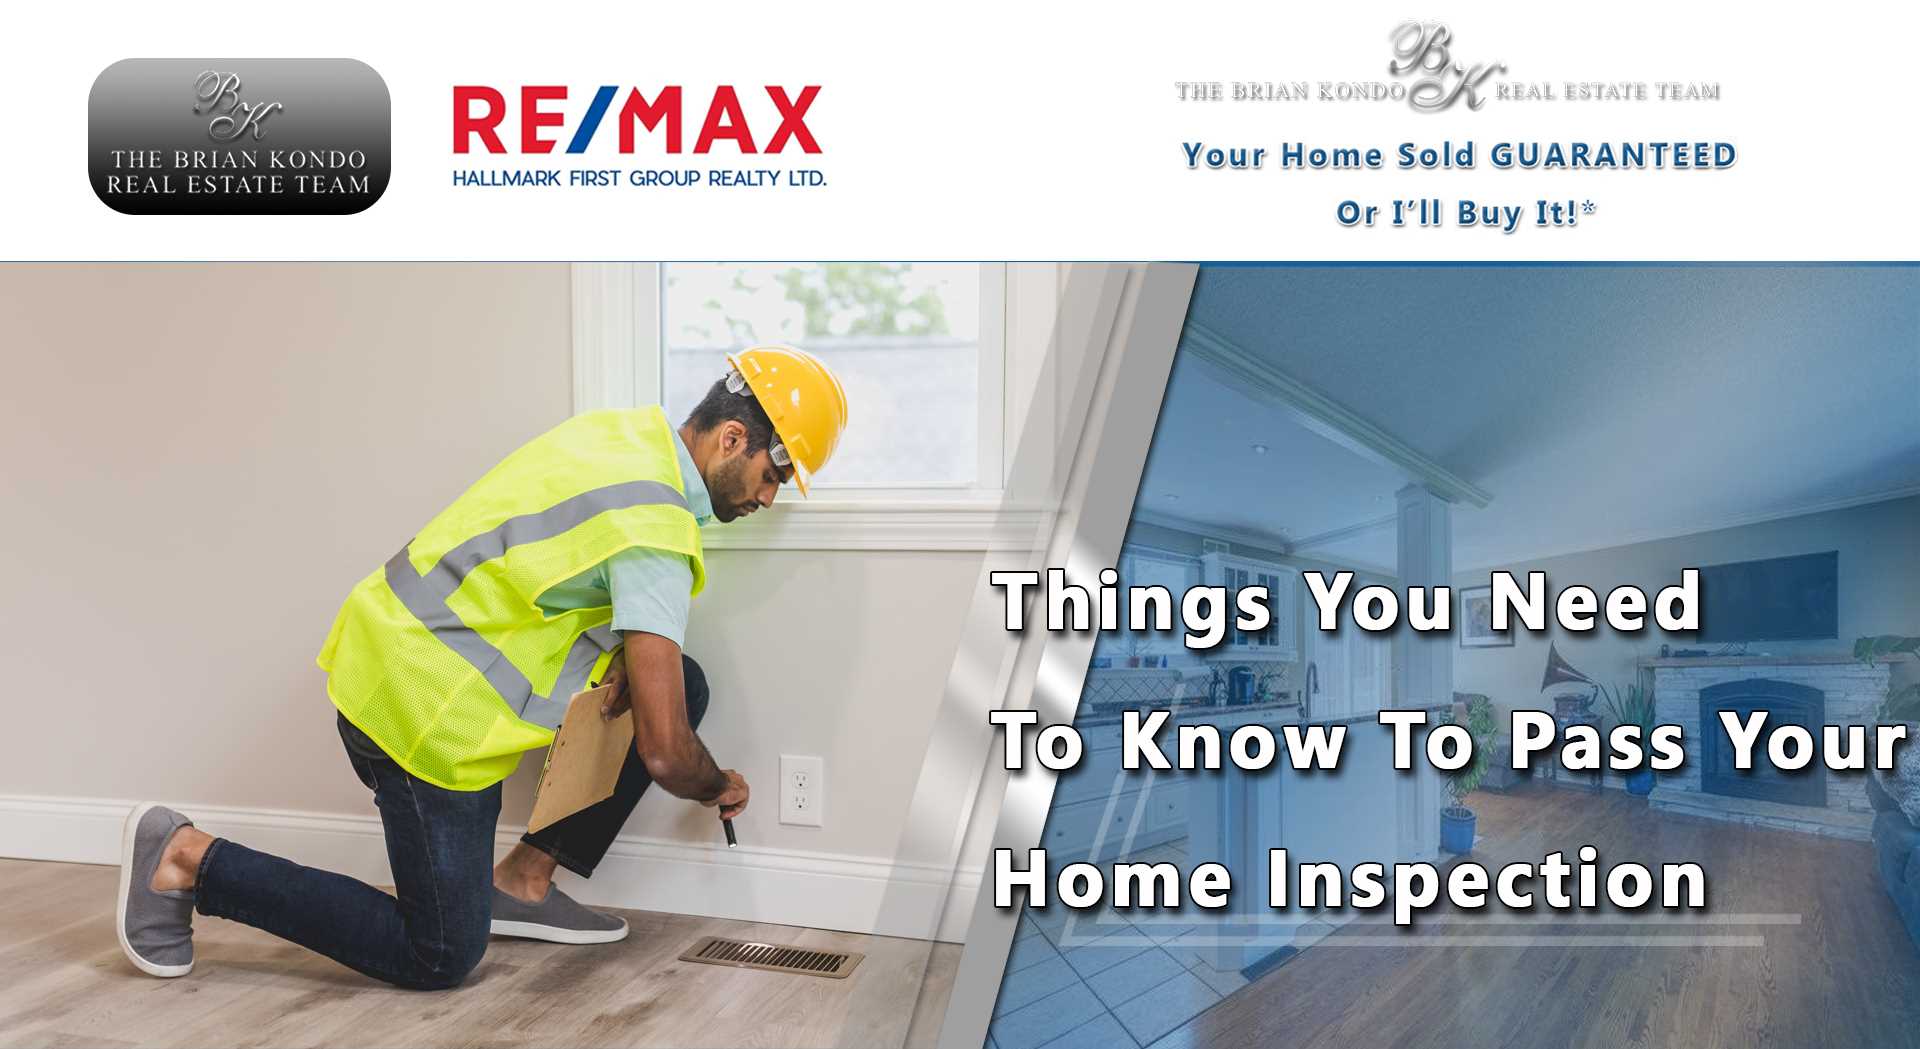 Things You Need to Know To Pass Your Home Inspection